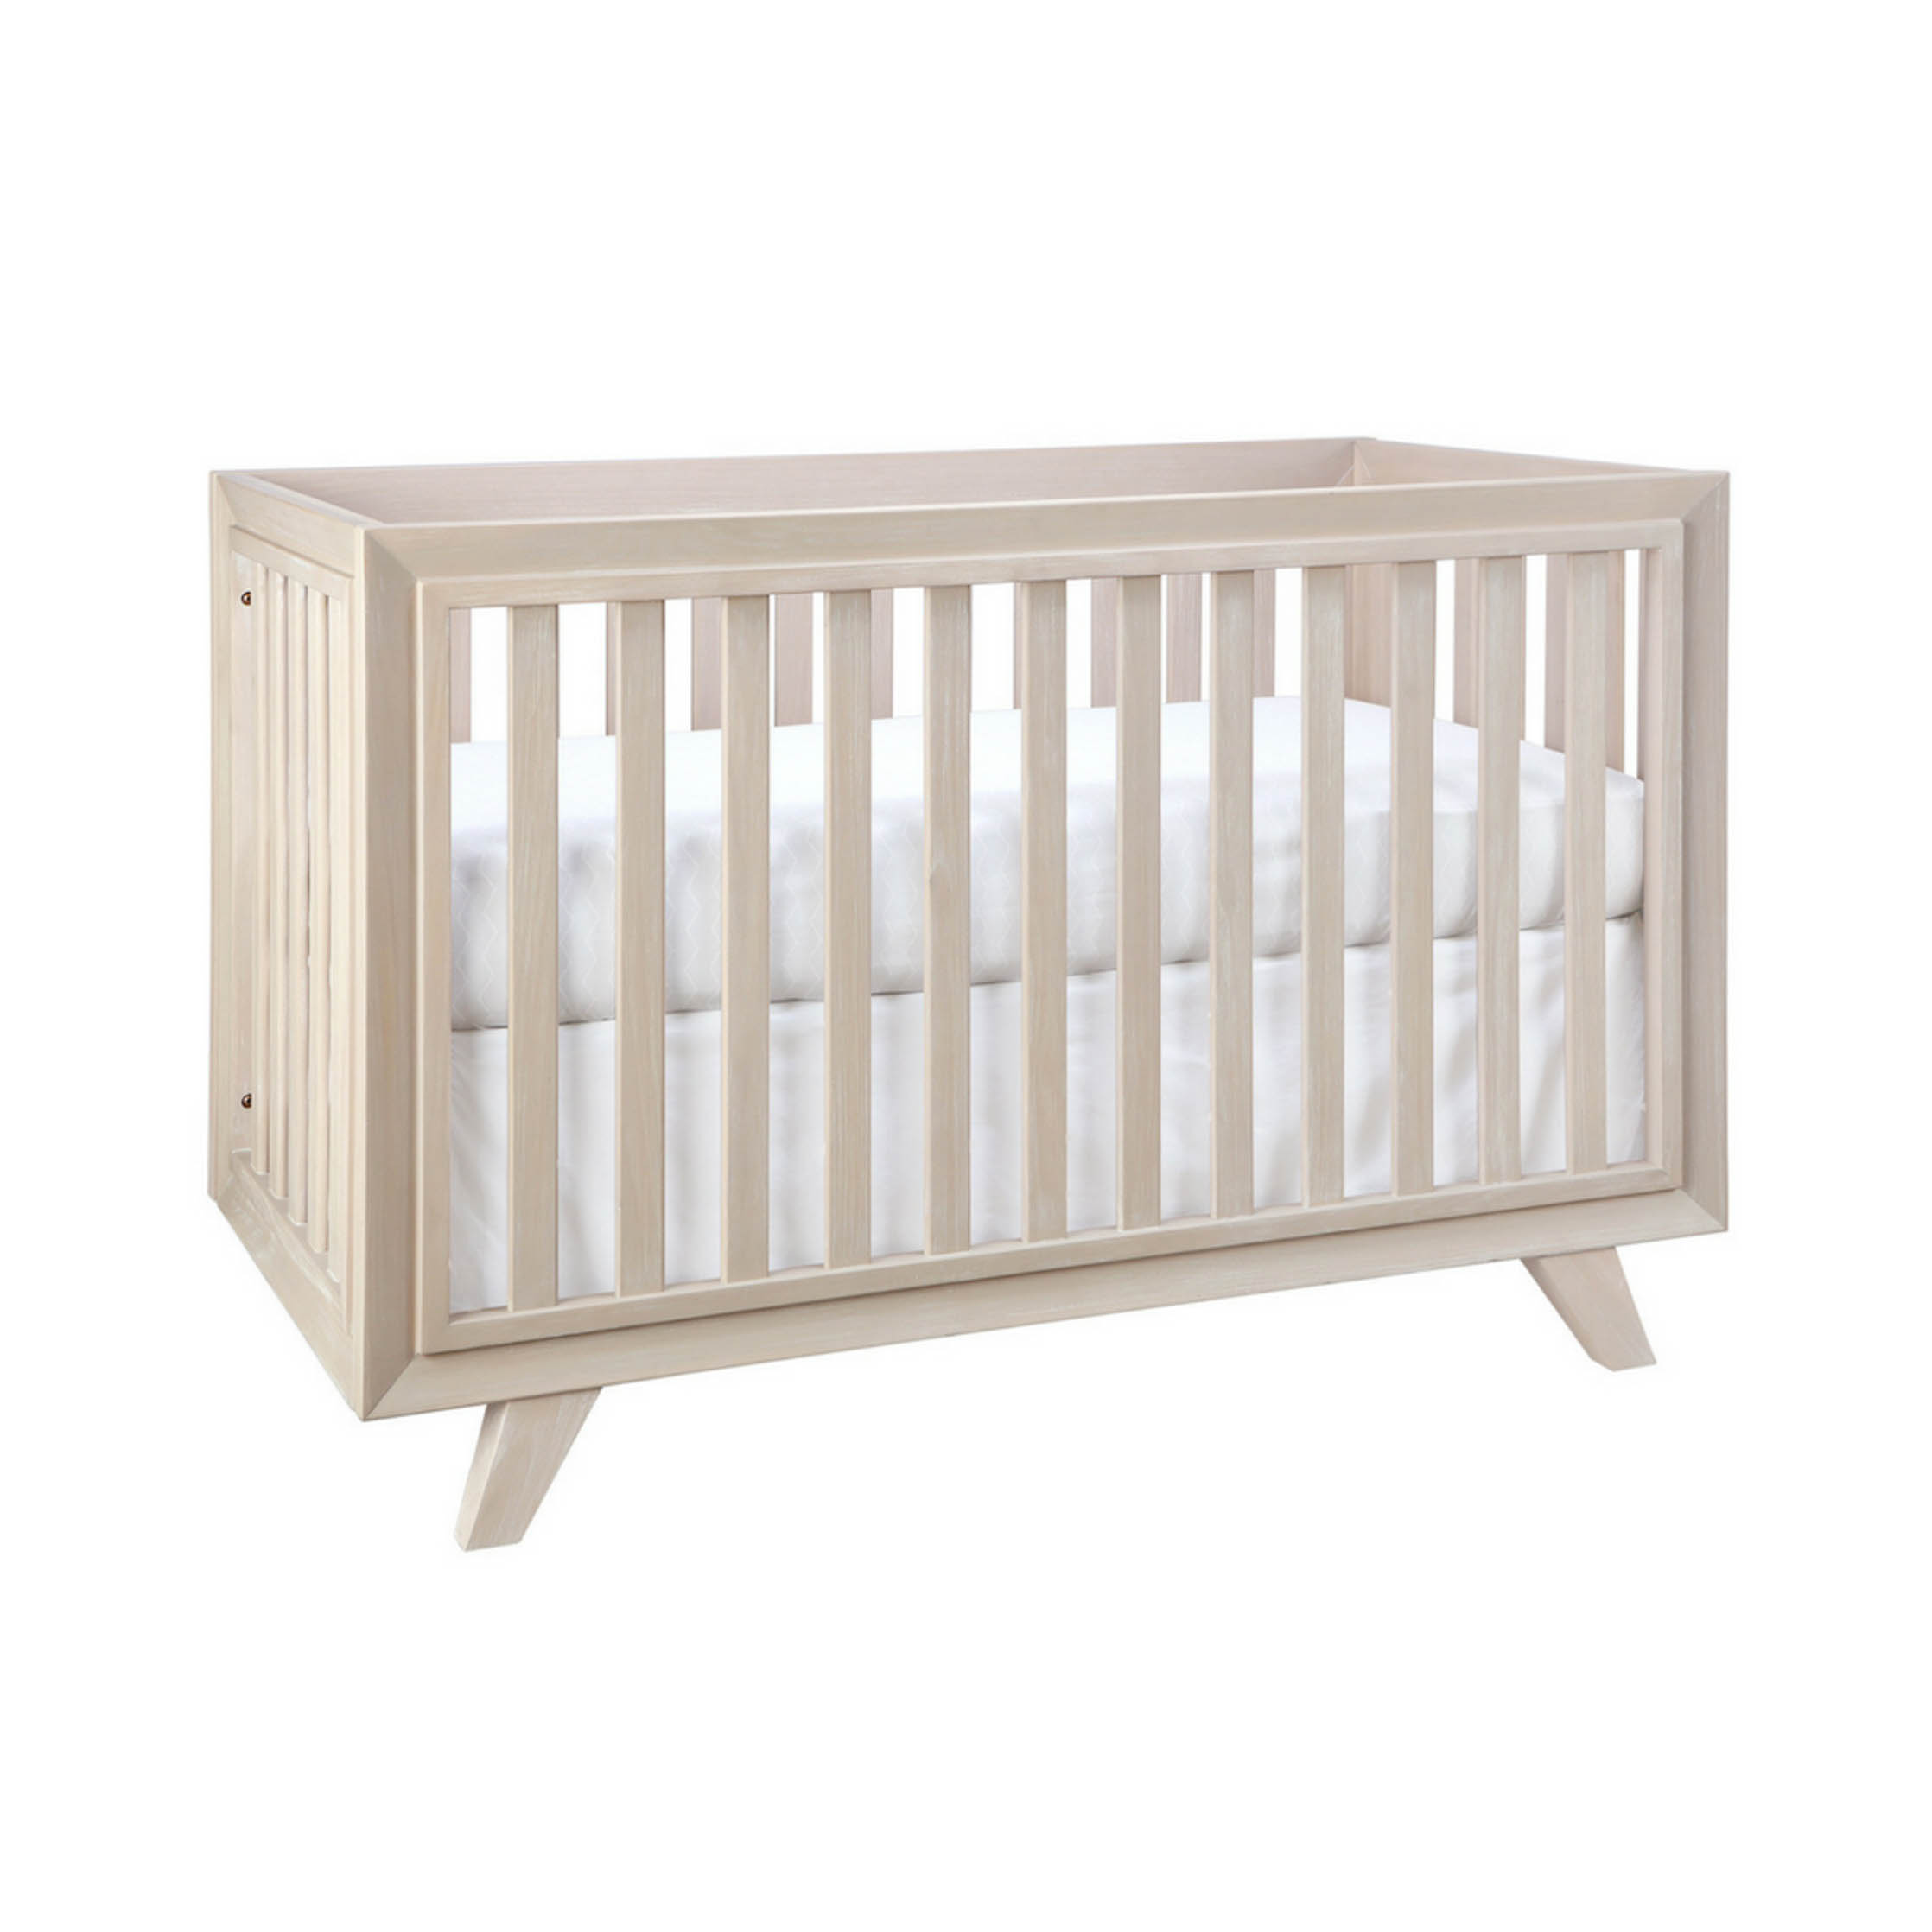 Wooster Crib in Almond